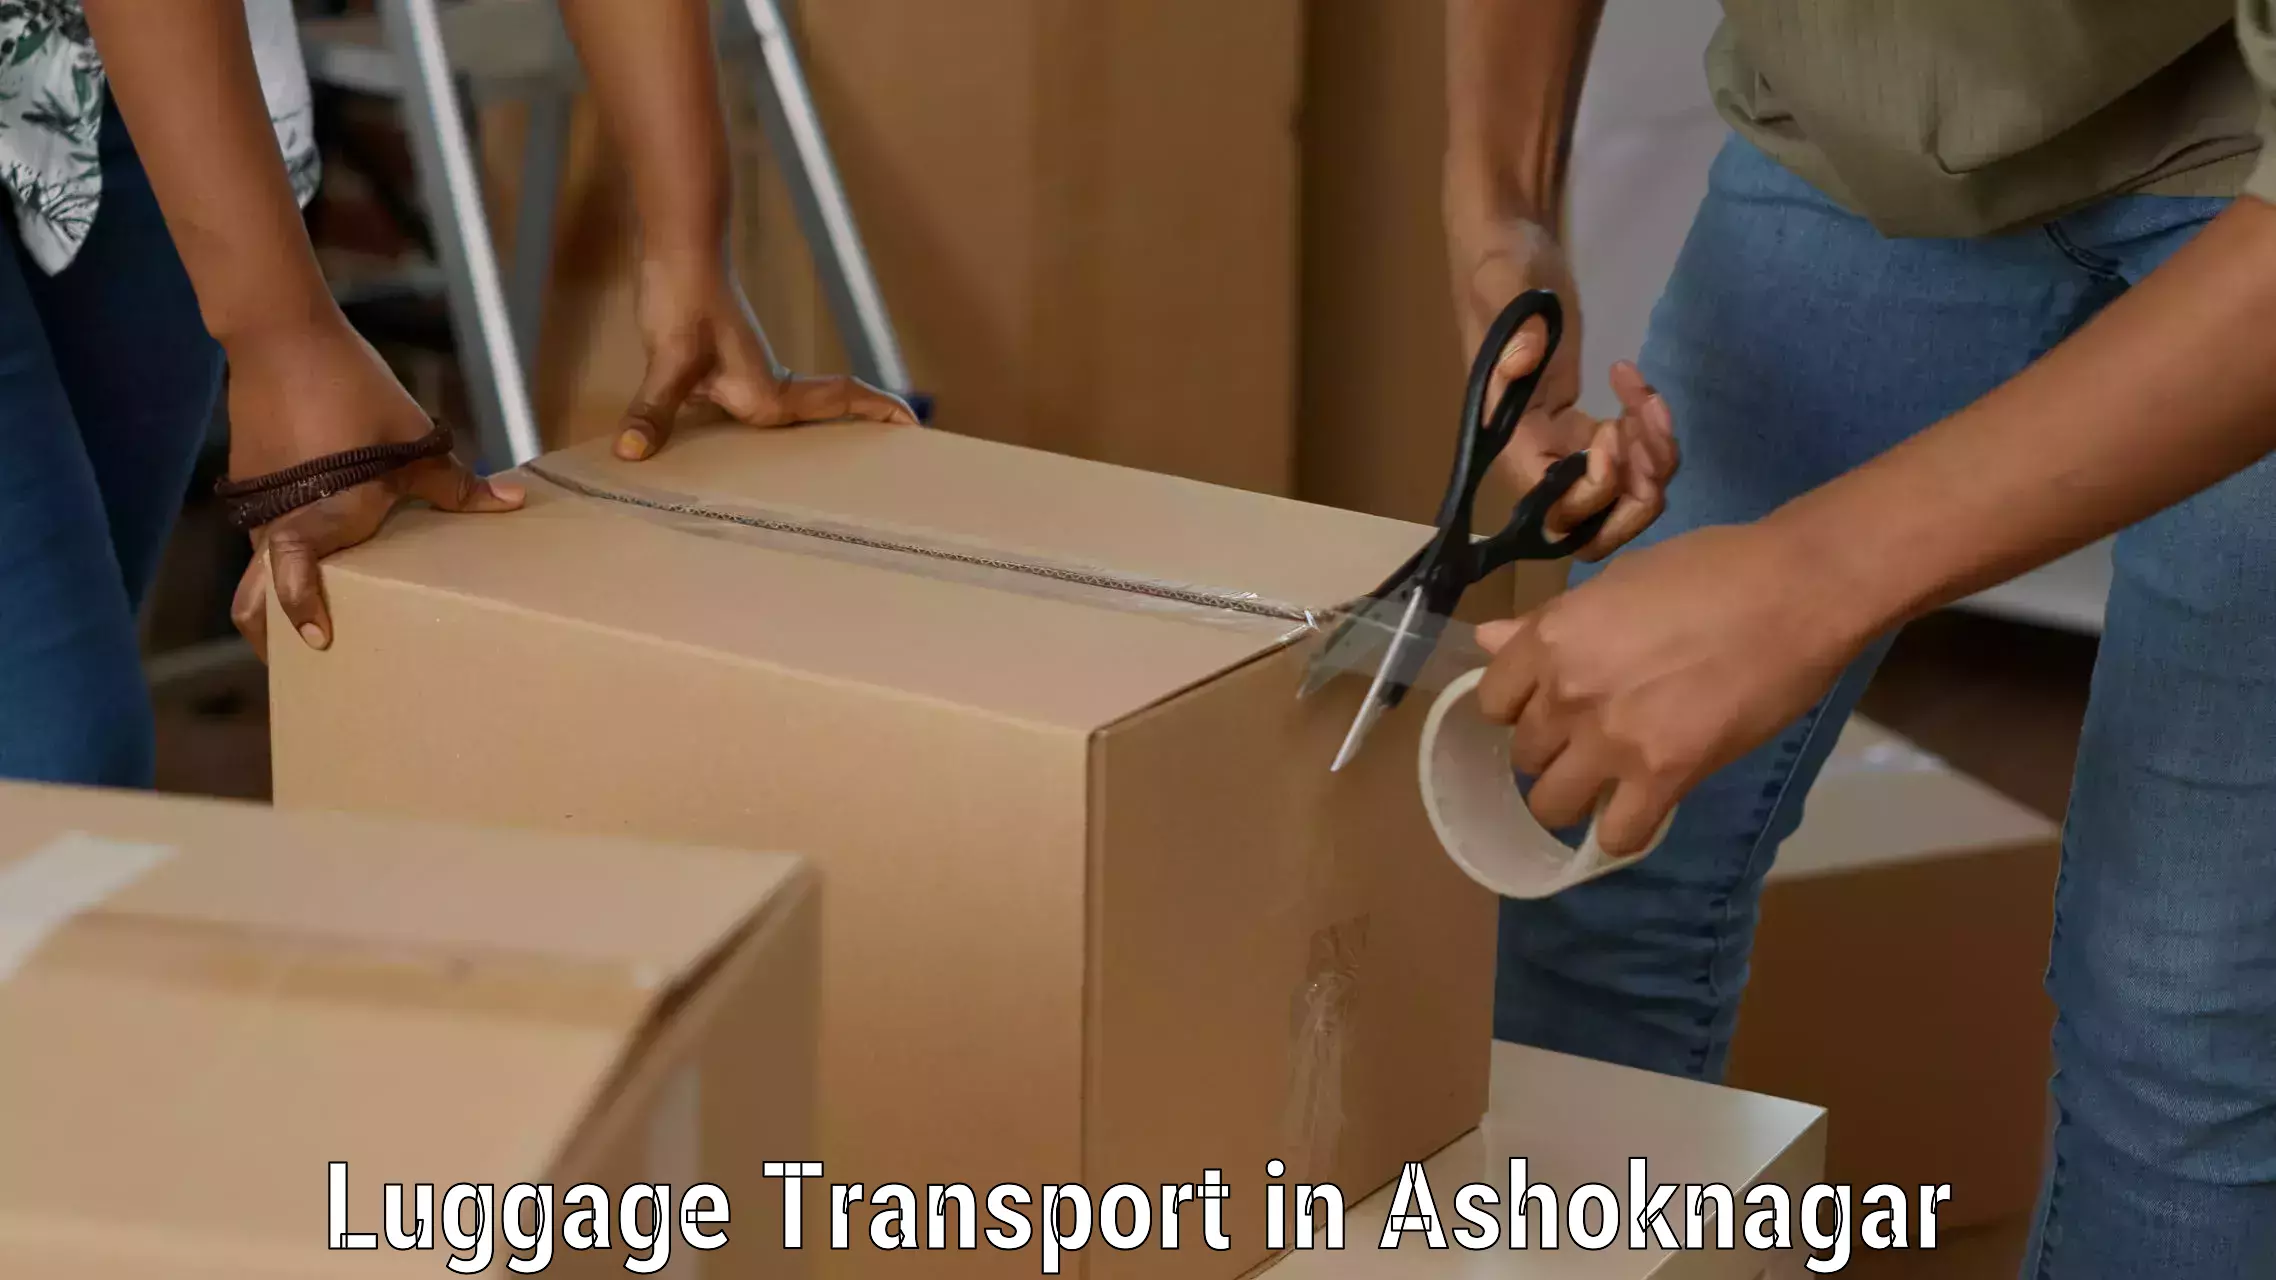 Express luggage delivery in Ashoknagar